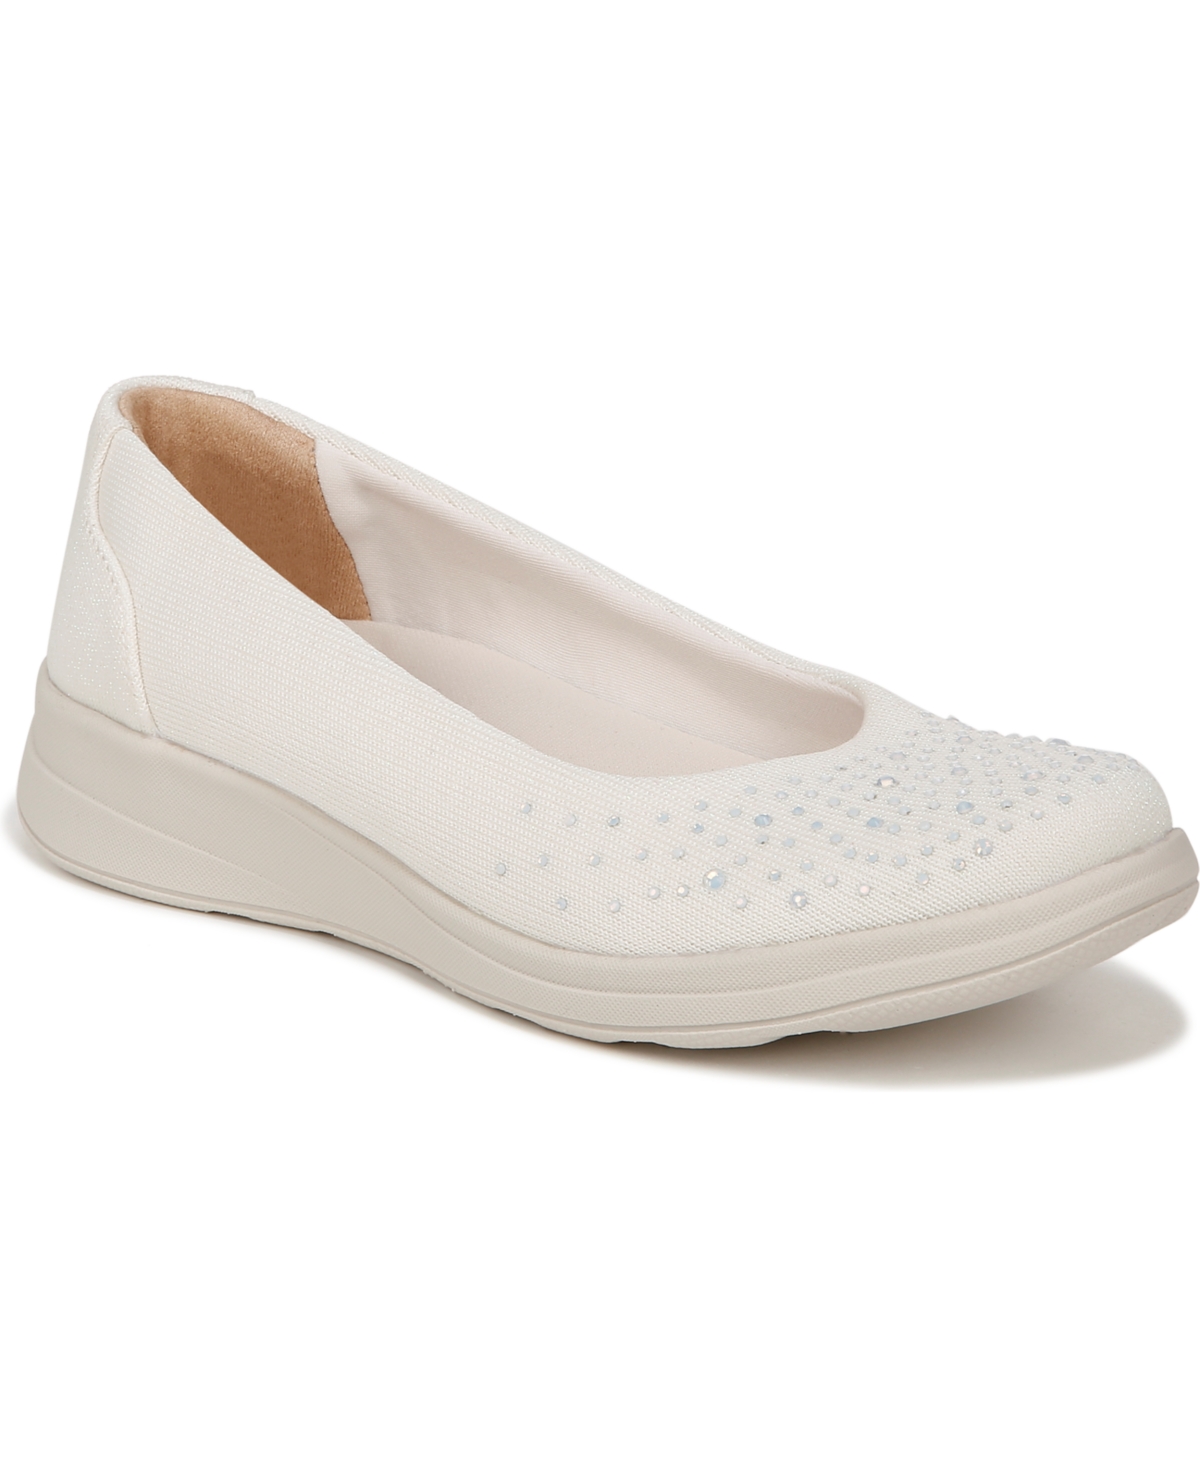 Golden Bright Washable Slip Ons - White Sparkle Knit Fabric